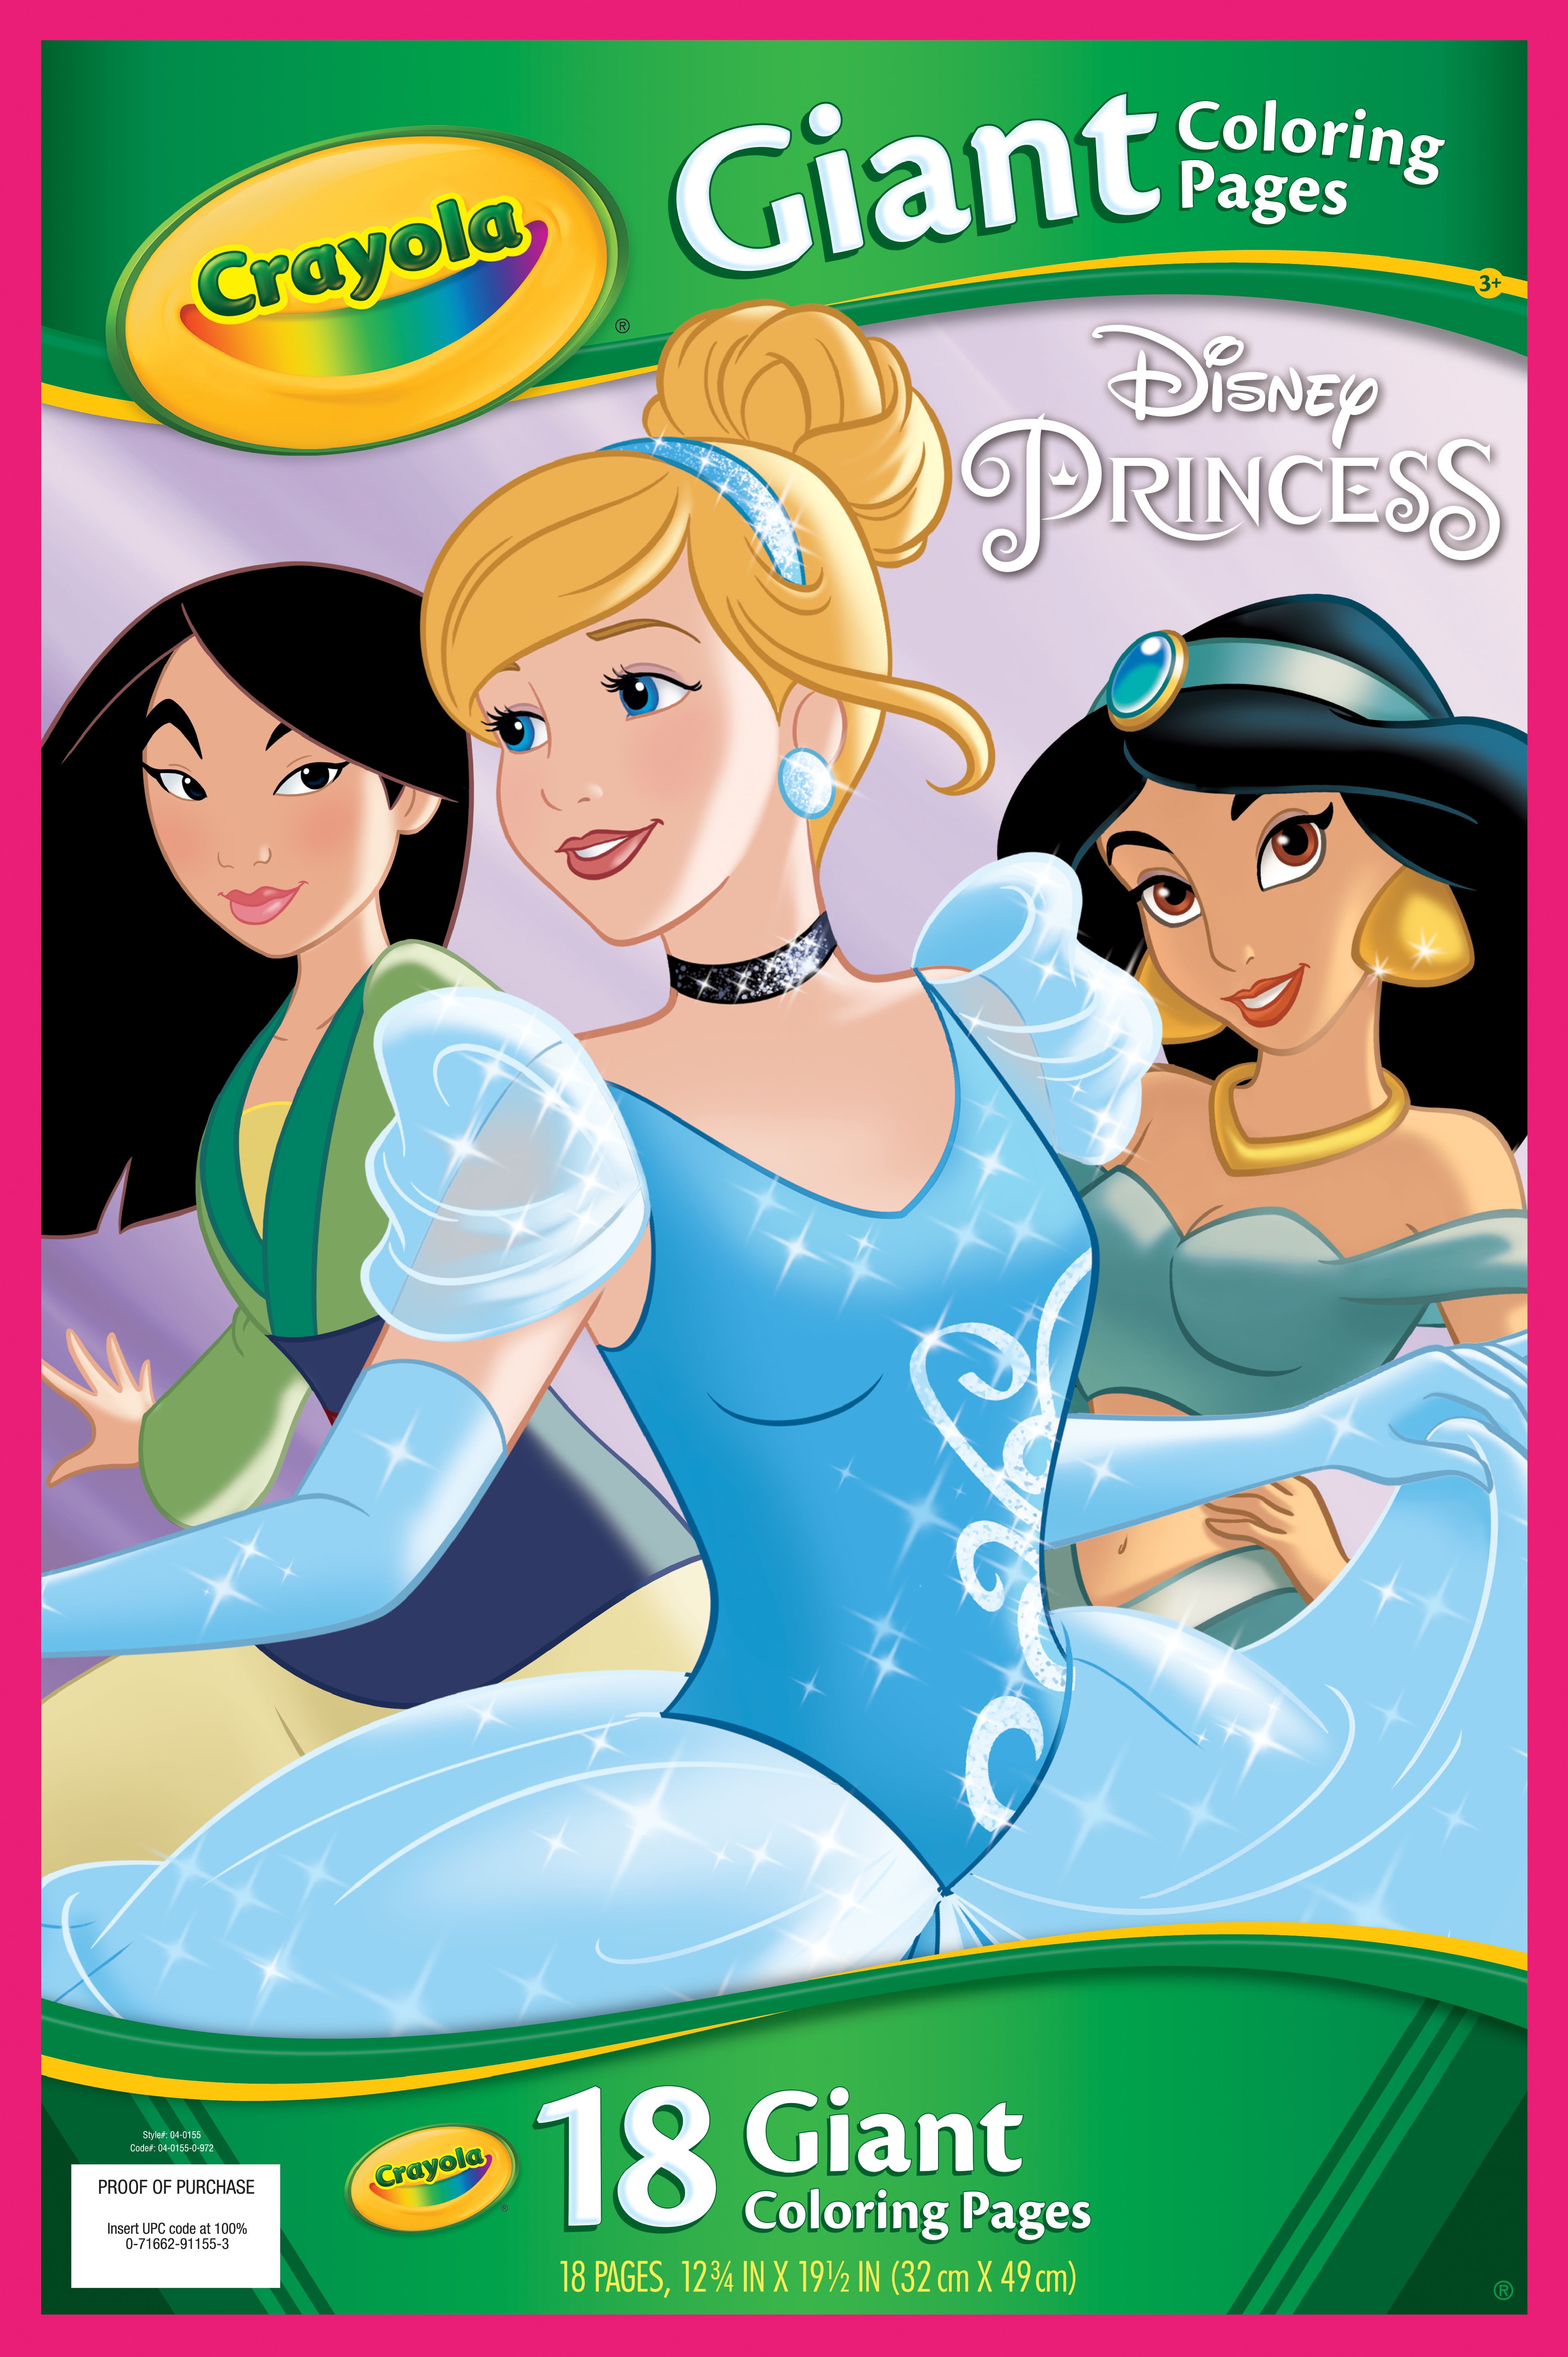 Crayola Giant Coloring Pages Disney Princess, Child, 20 Pages